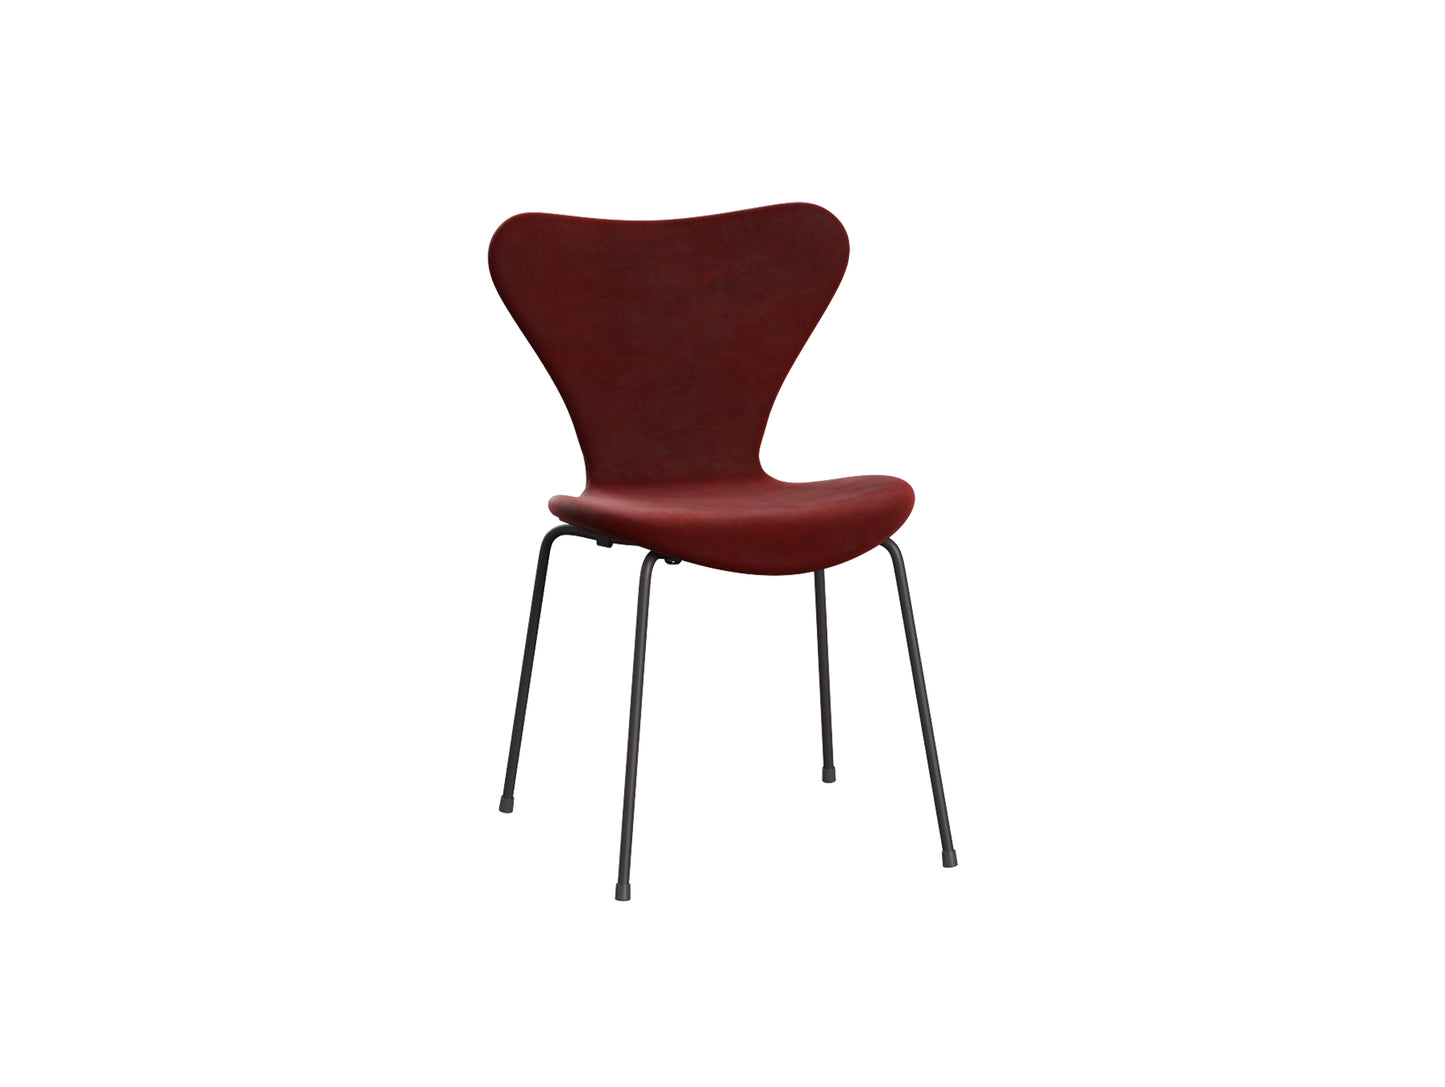 Series 7™ 3107 Dining Chair (Fully Upholstered) by Fritz Hansen - Warm Graphite Steel / Belfast Autumn Red